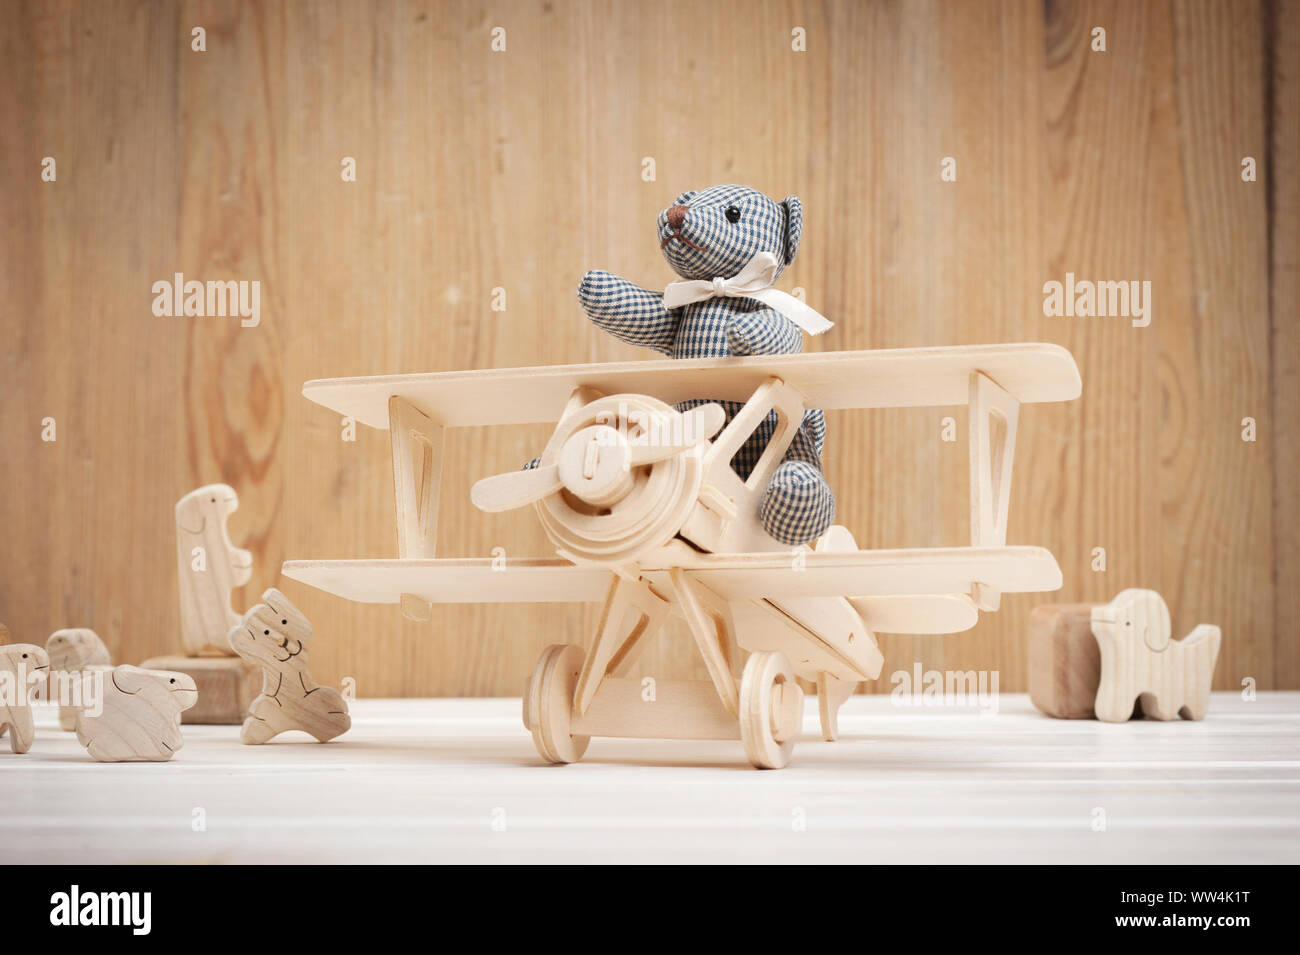 Cute teddy bear on wooden background with wooden baby toys Stock Photo